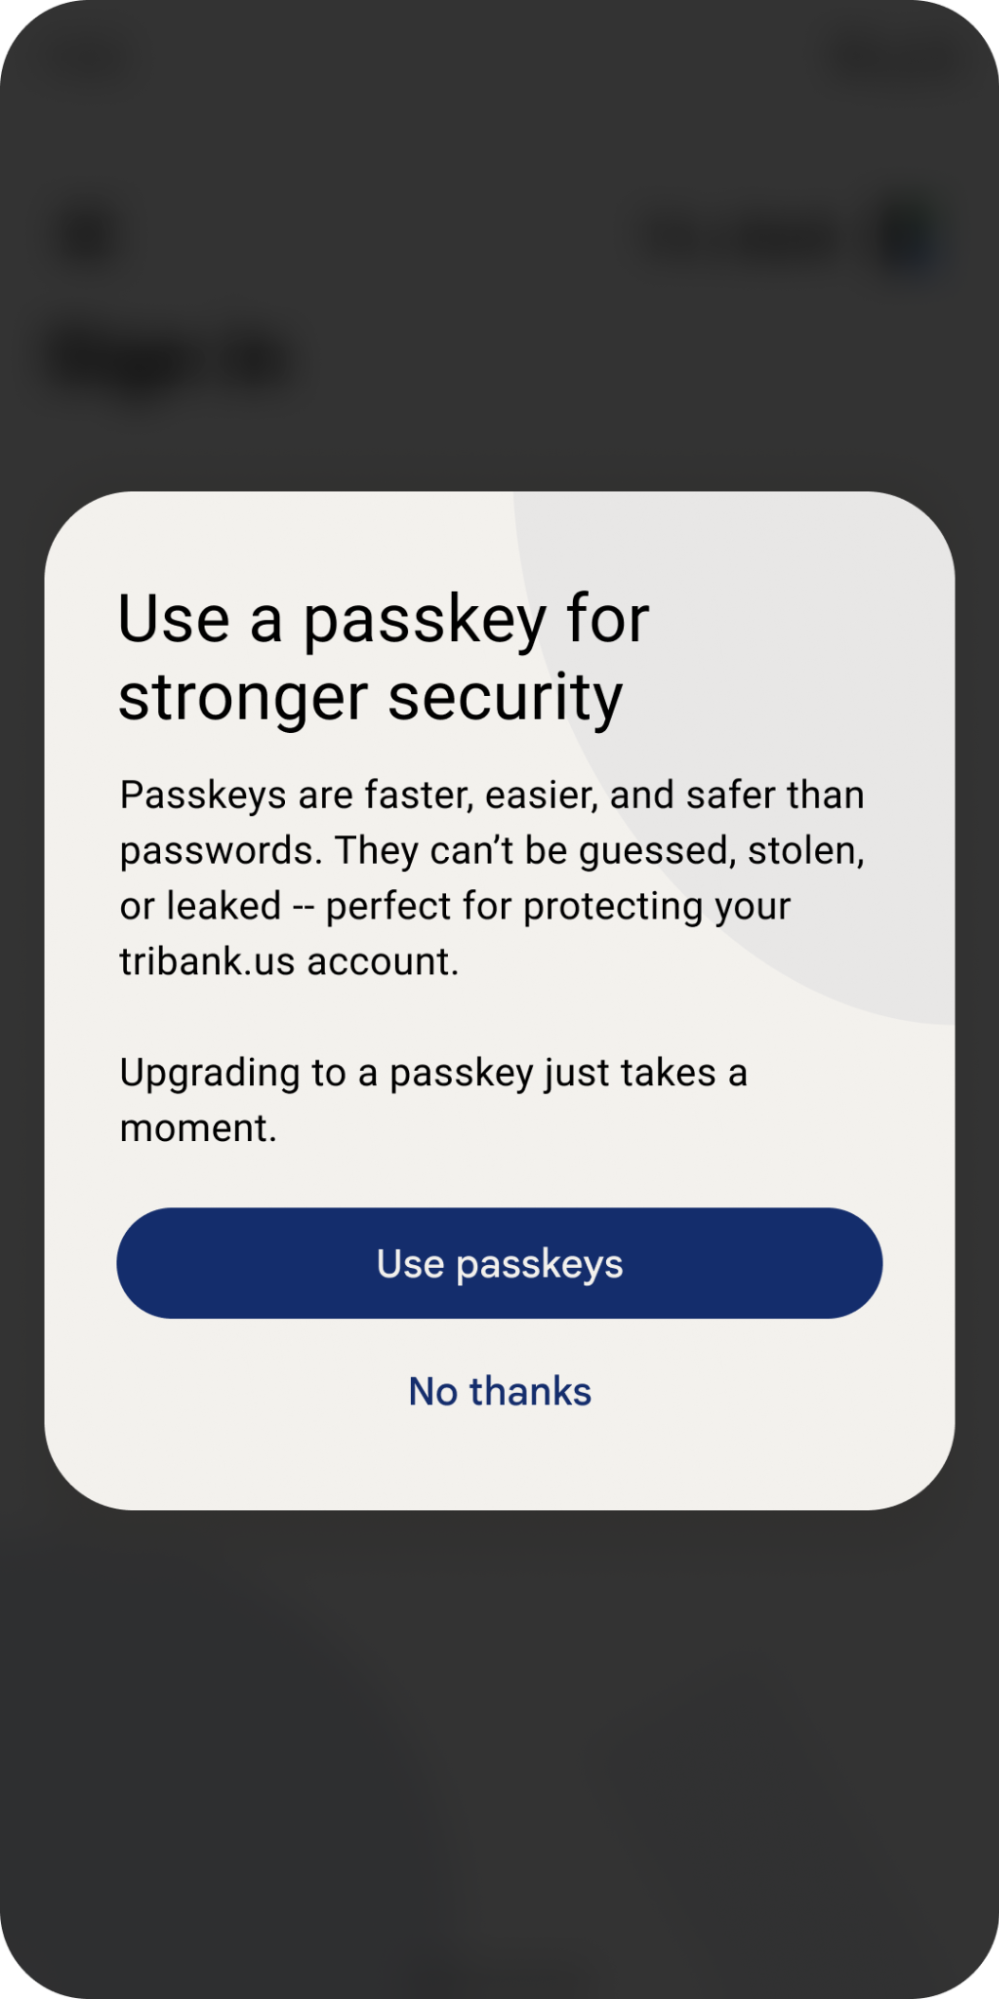 Pop-up offering user to use passkeys for faster and safer passwords.